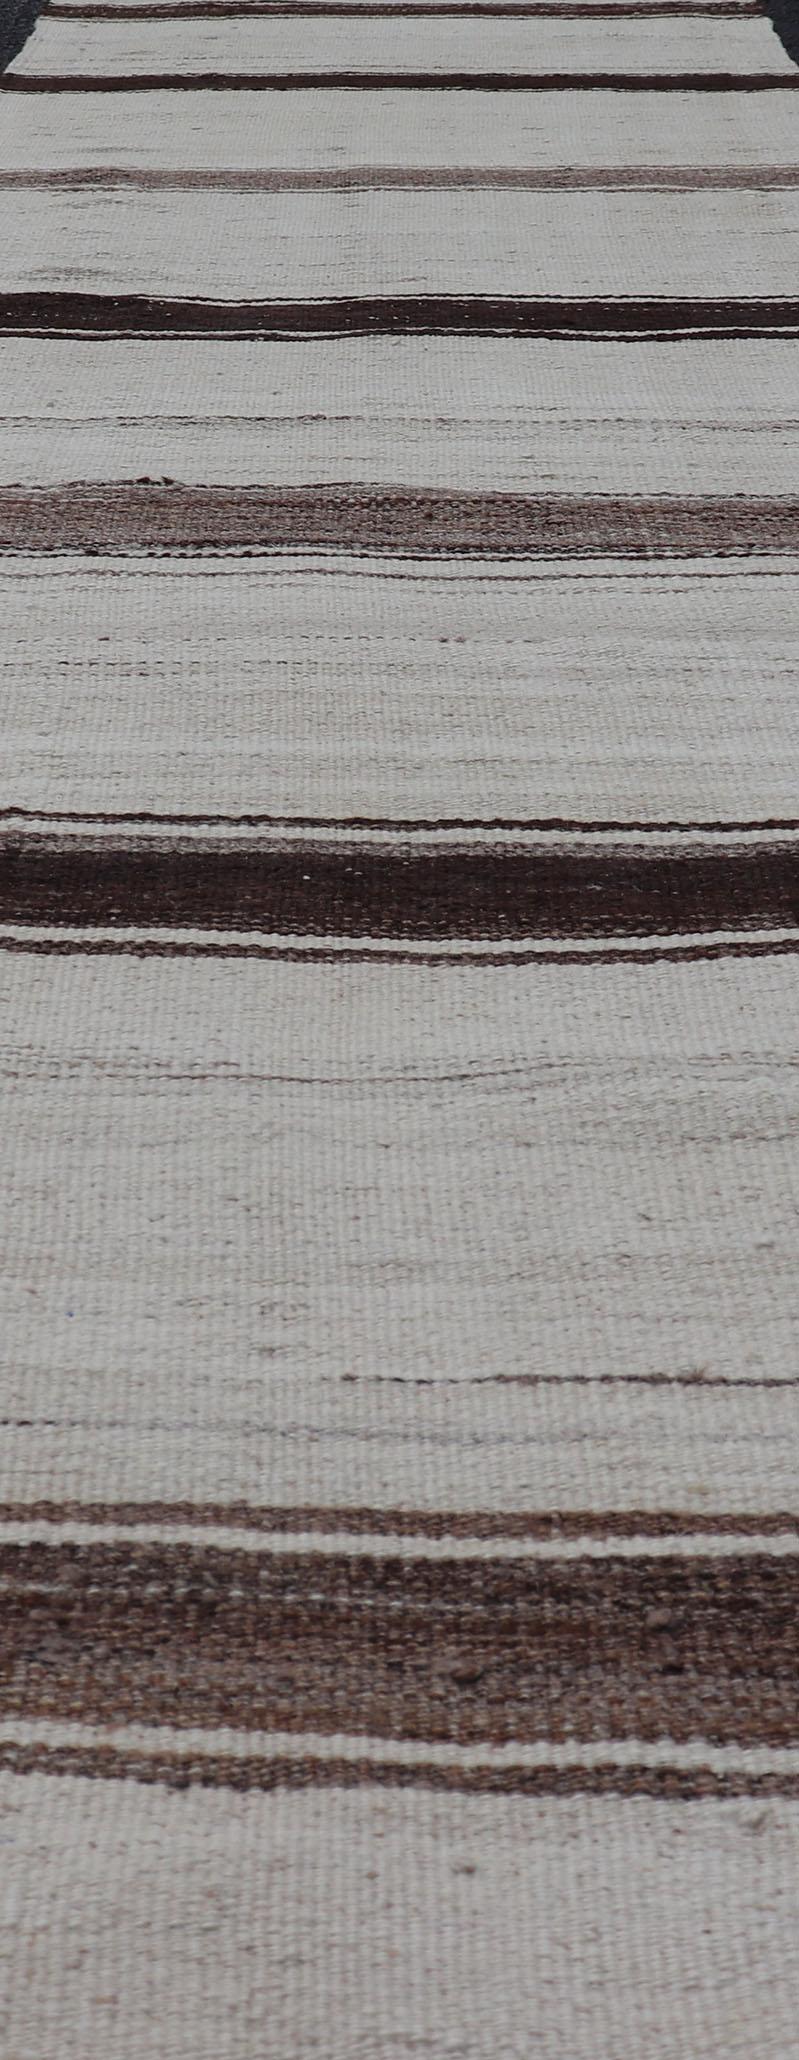 Wool Vintage Turkish Striped Kilim Runner in White, Black, Brown and Tan For Sale